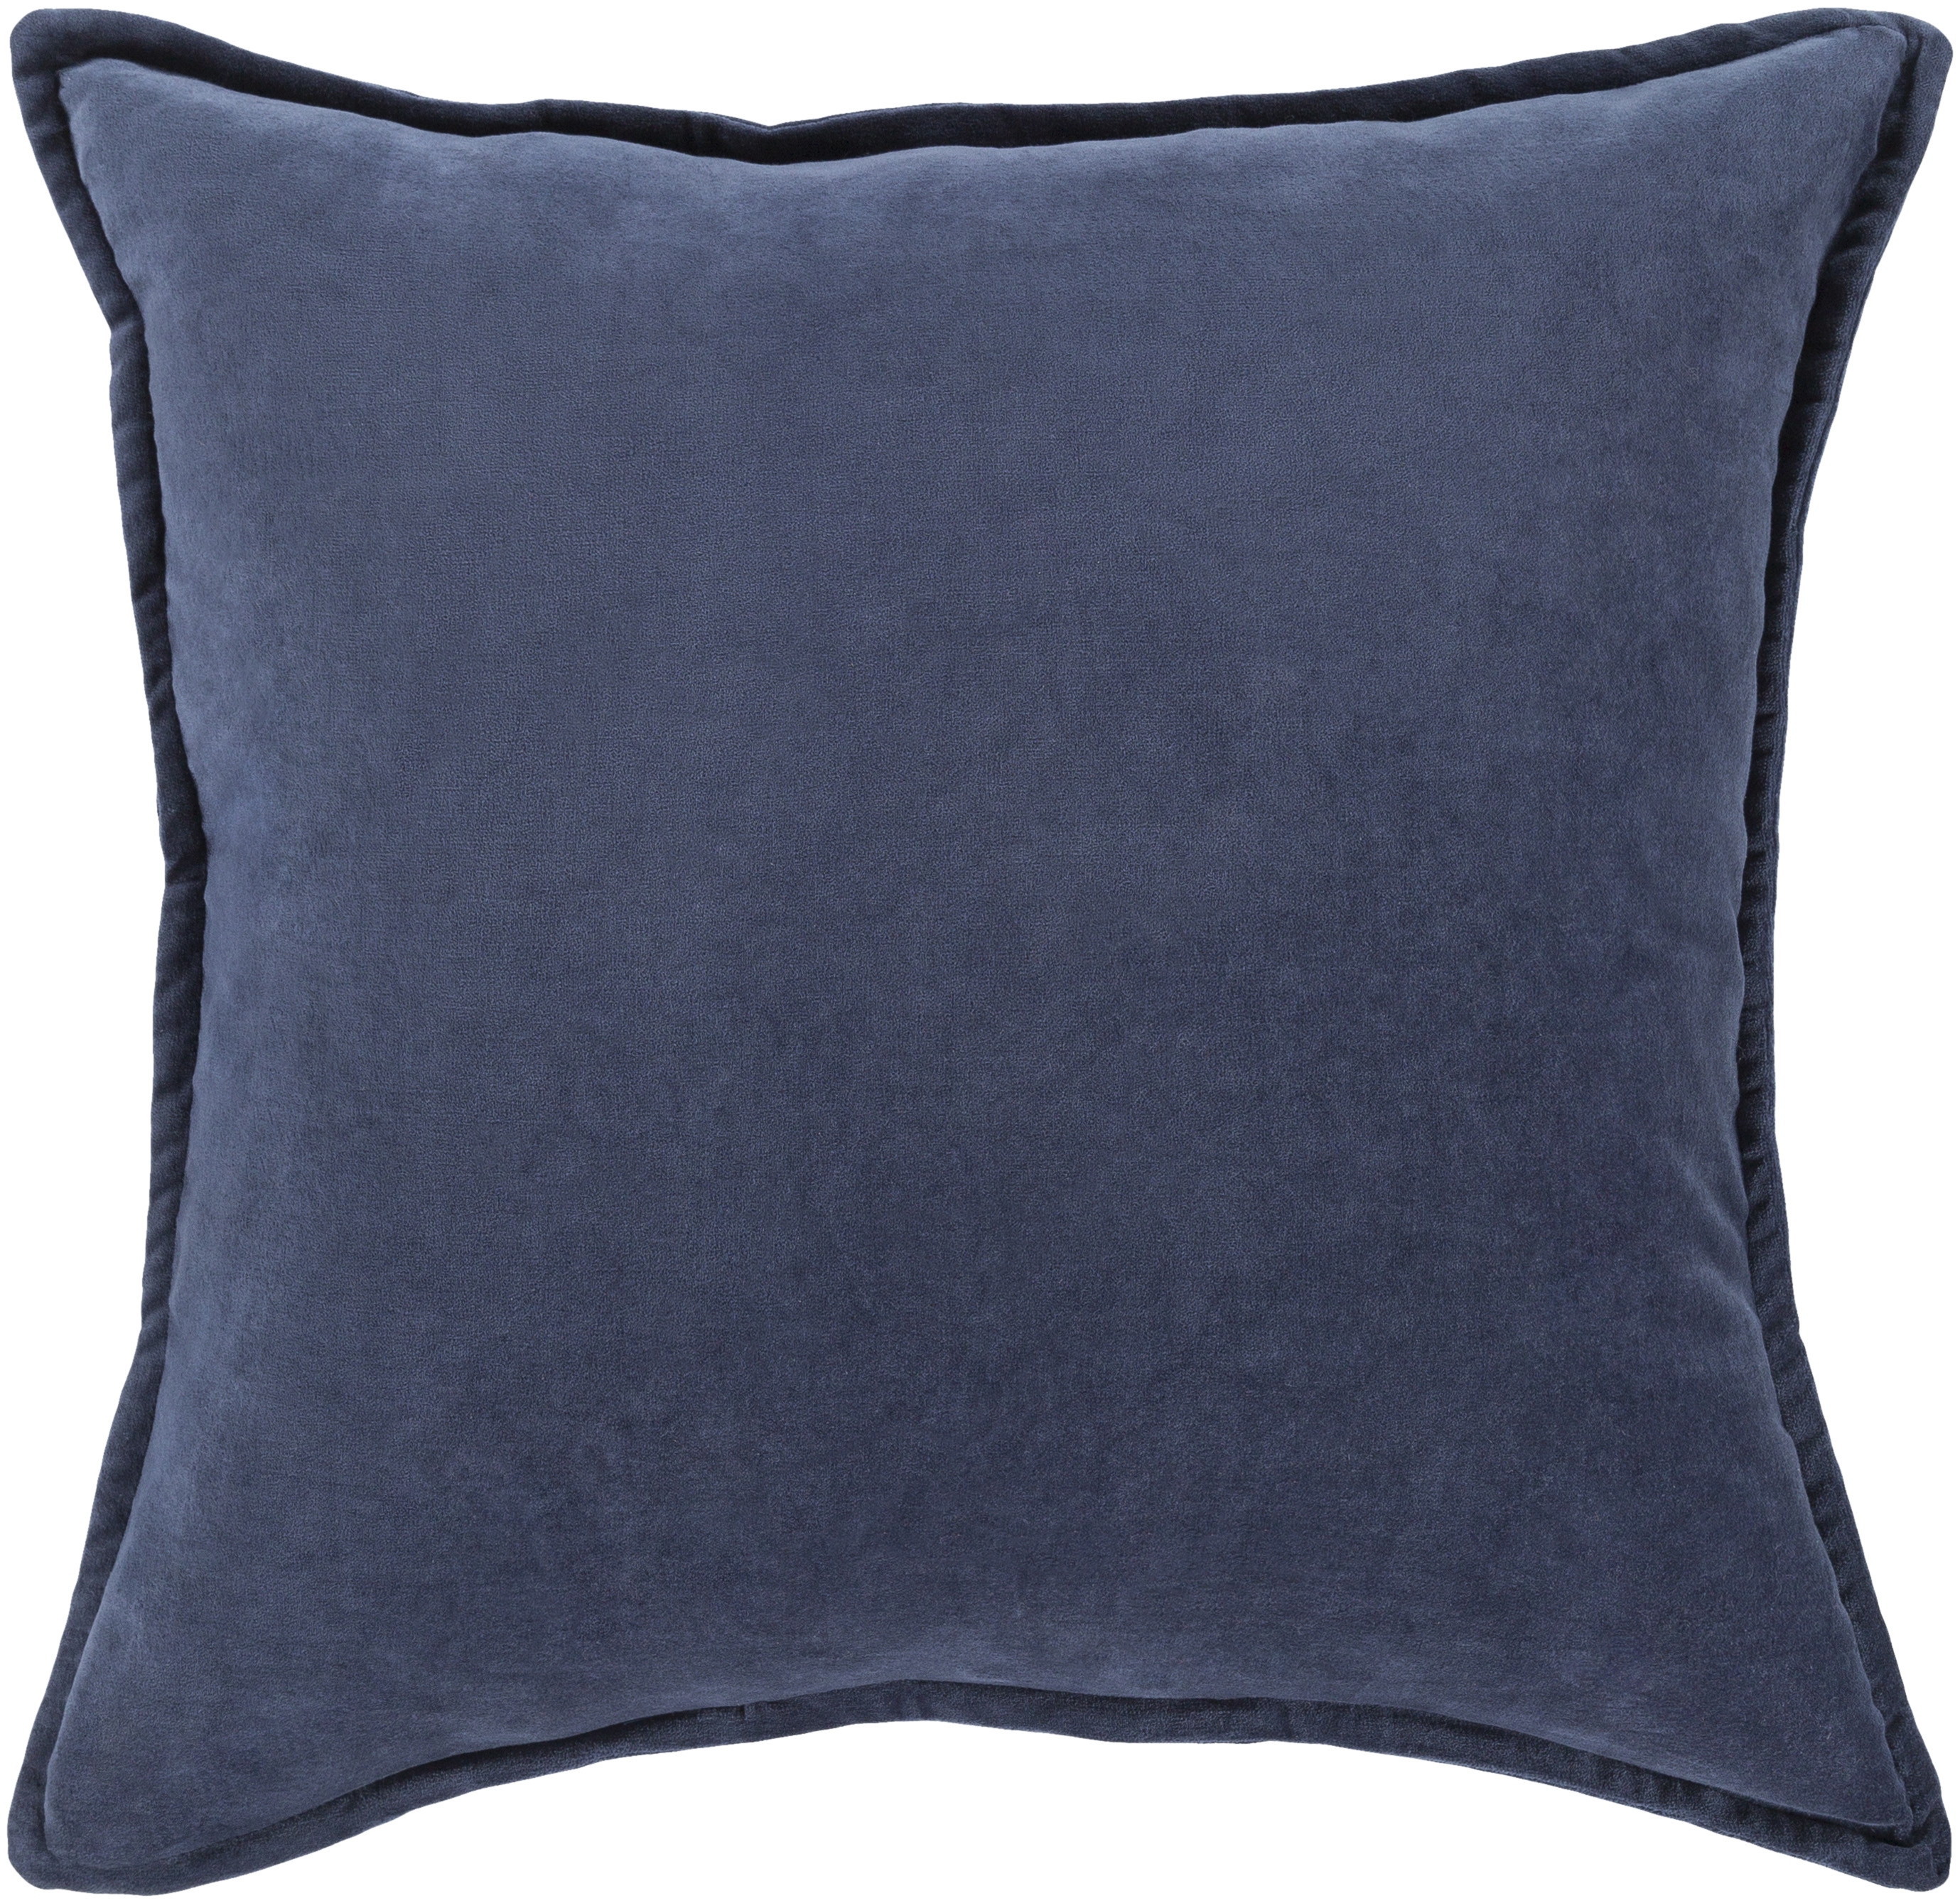 Cotton Velvet Pillow - 22x22" with Poly Insert - Image 0